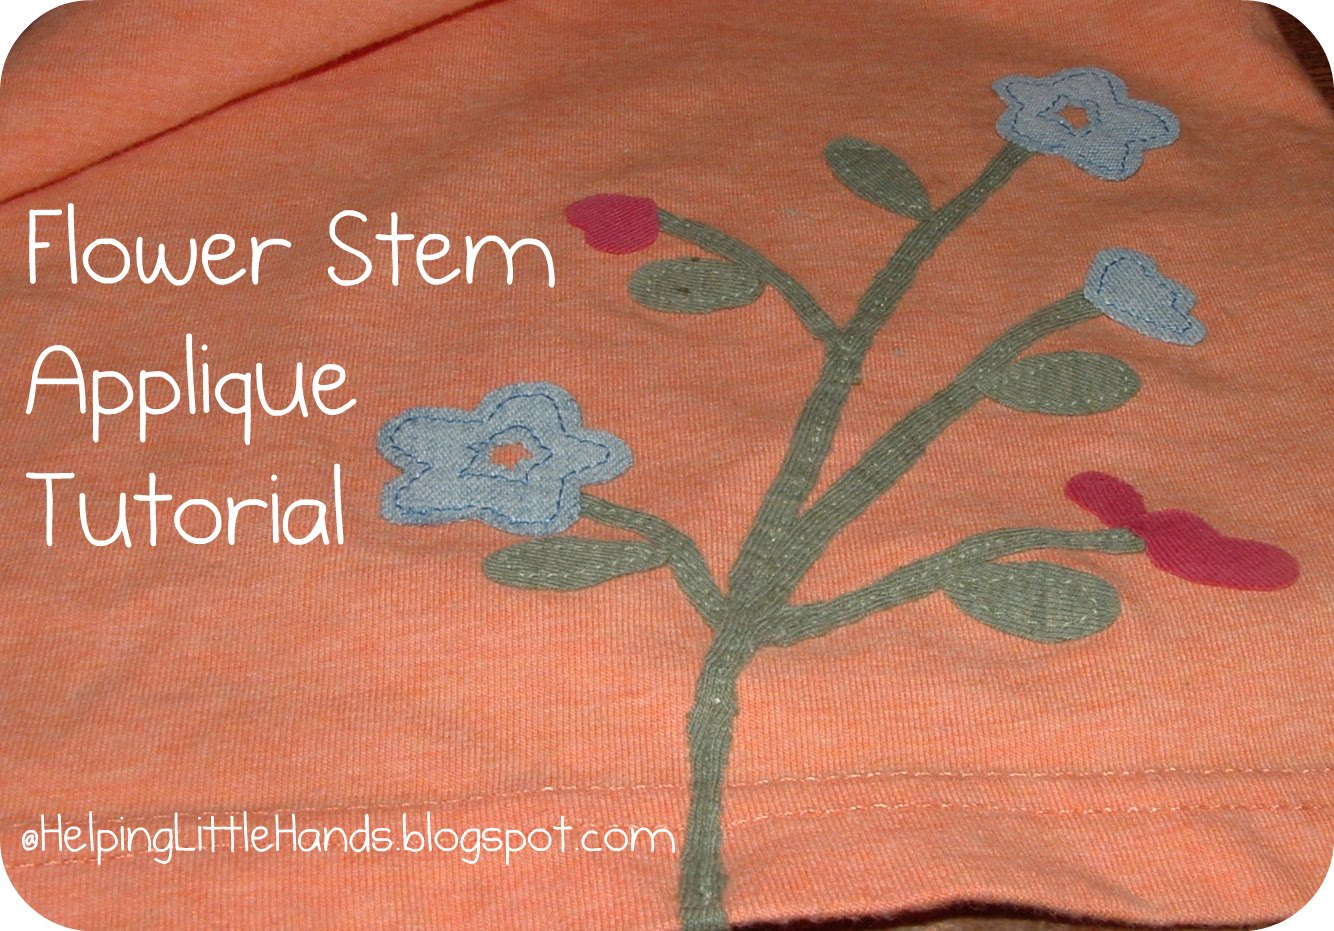 Preparing Applique pieces with heat and bond tutorial : This is sew